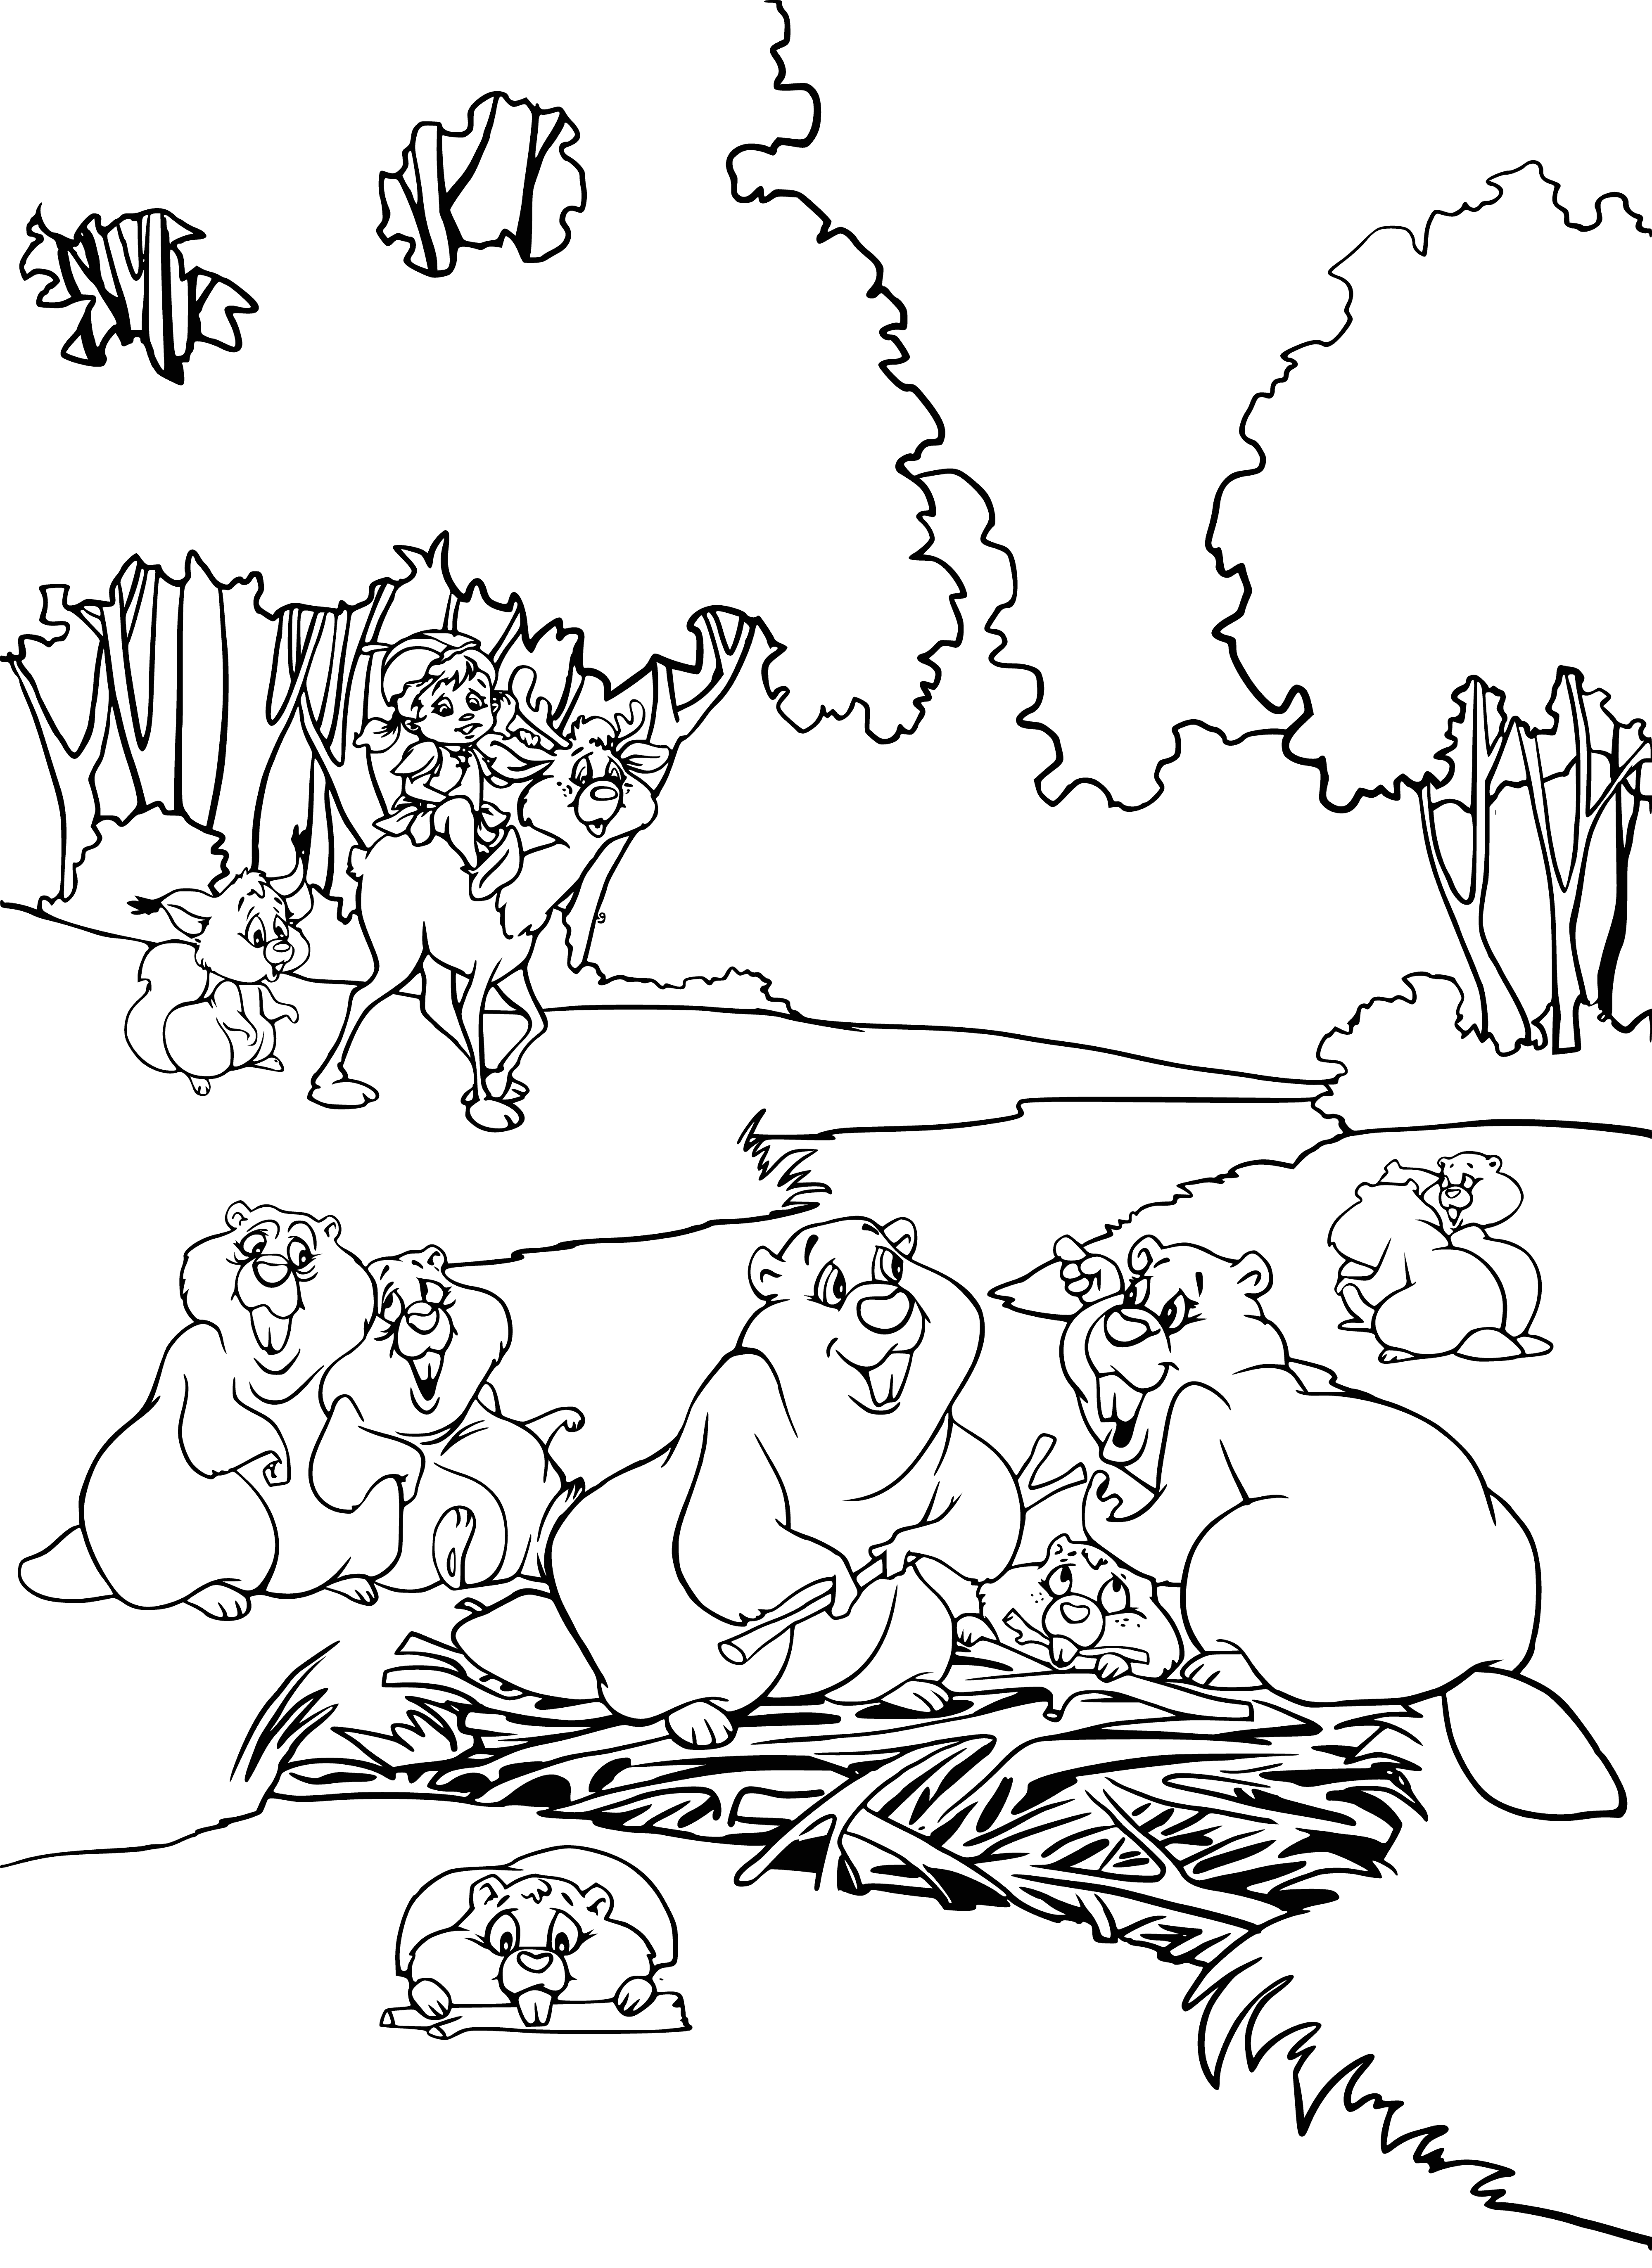 coloring page: Beavers building dam, tails swatting at water, Otter swimming around. Beavers using teeth to chew wood.